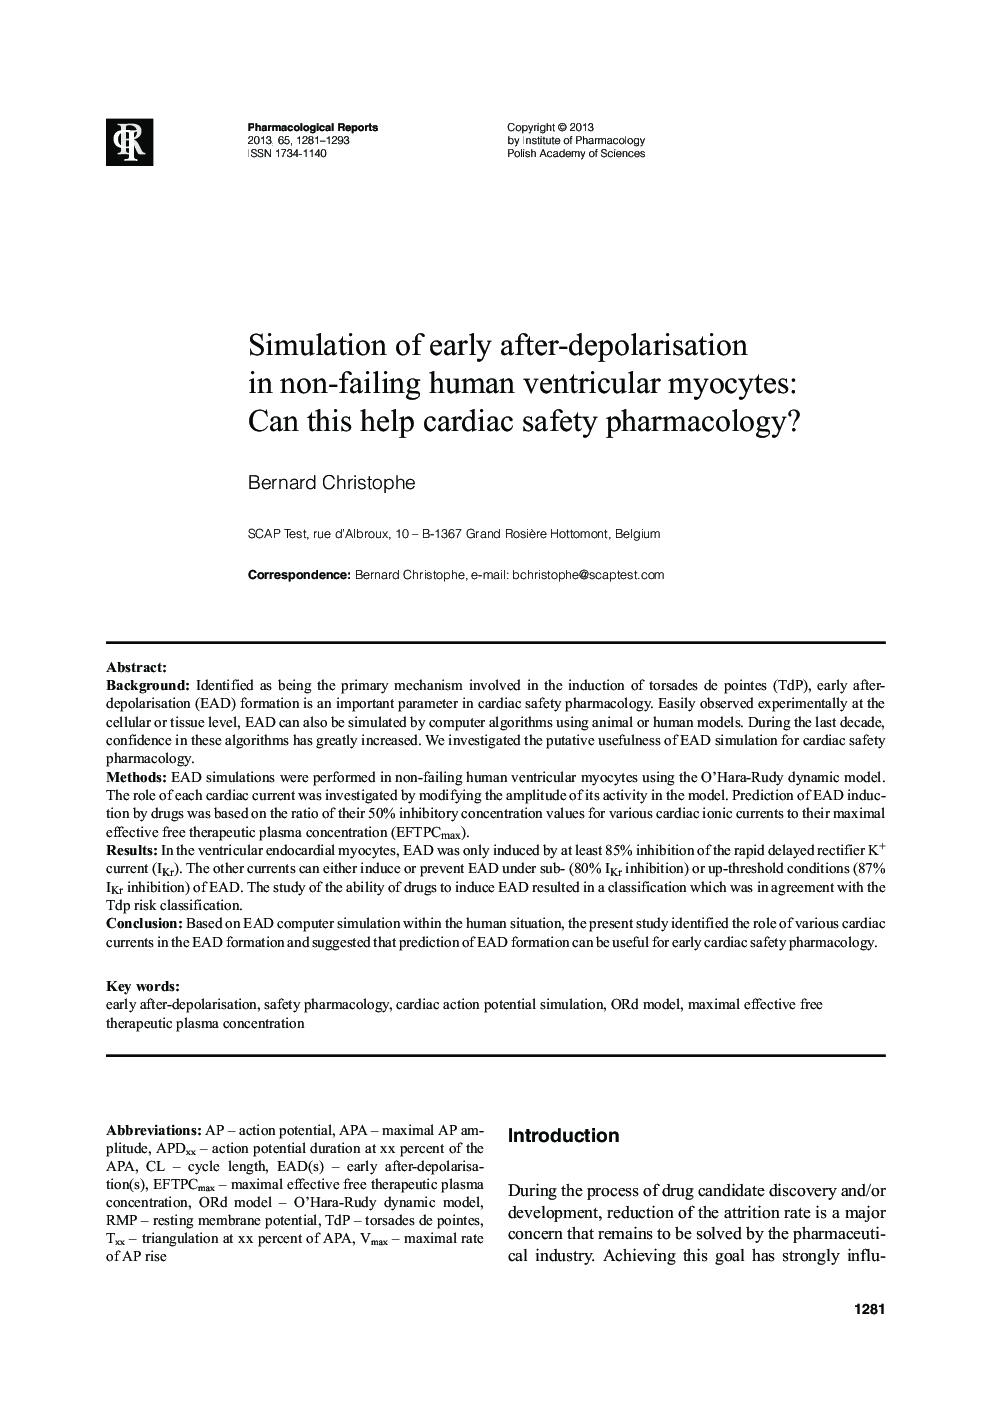 Simulation of early after-depolarisation in non-failing human ventricular myocytes: Can this help cardiac safety pharmacology?